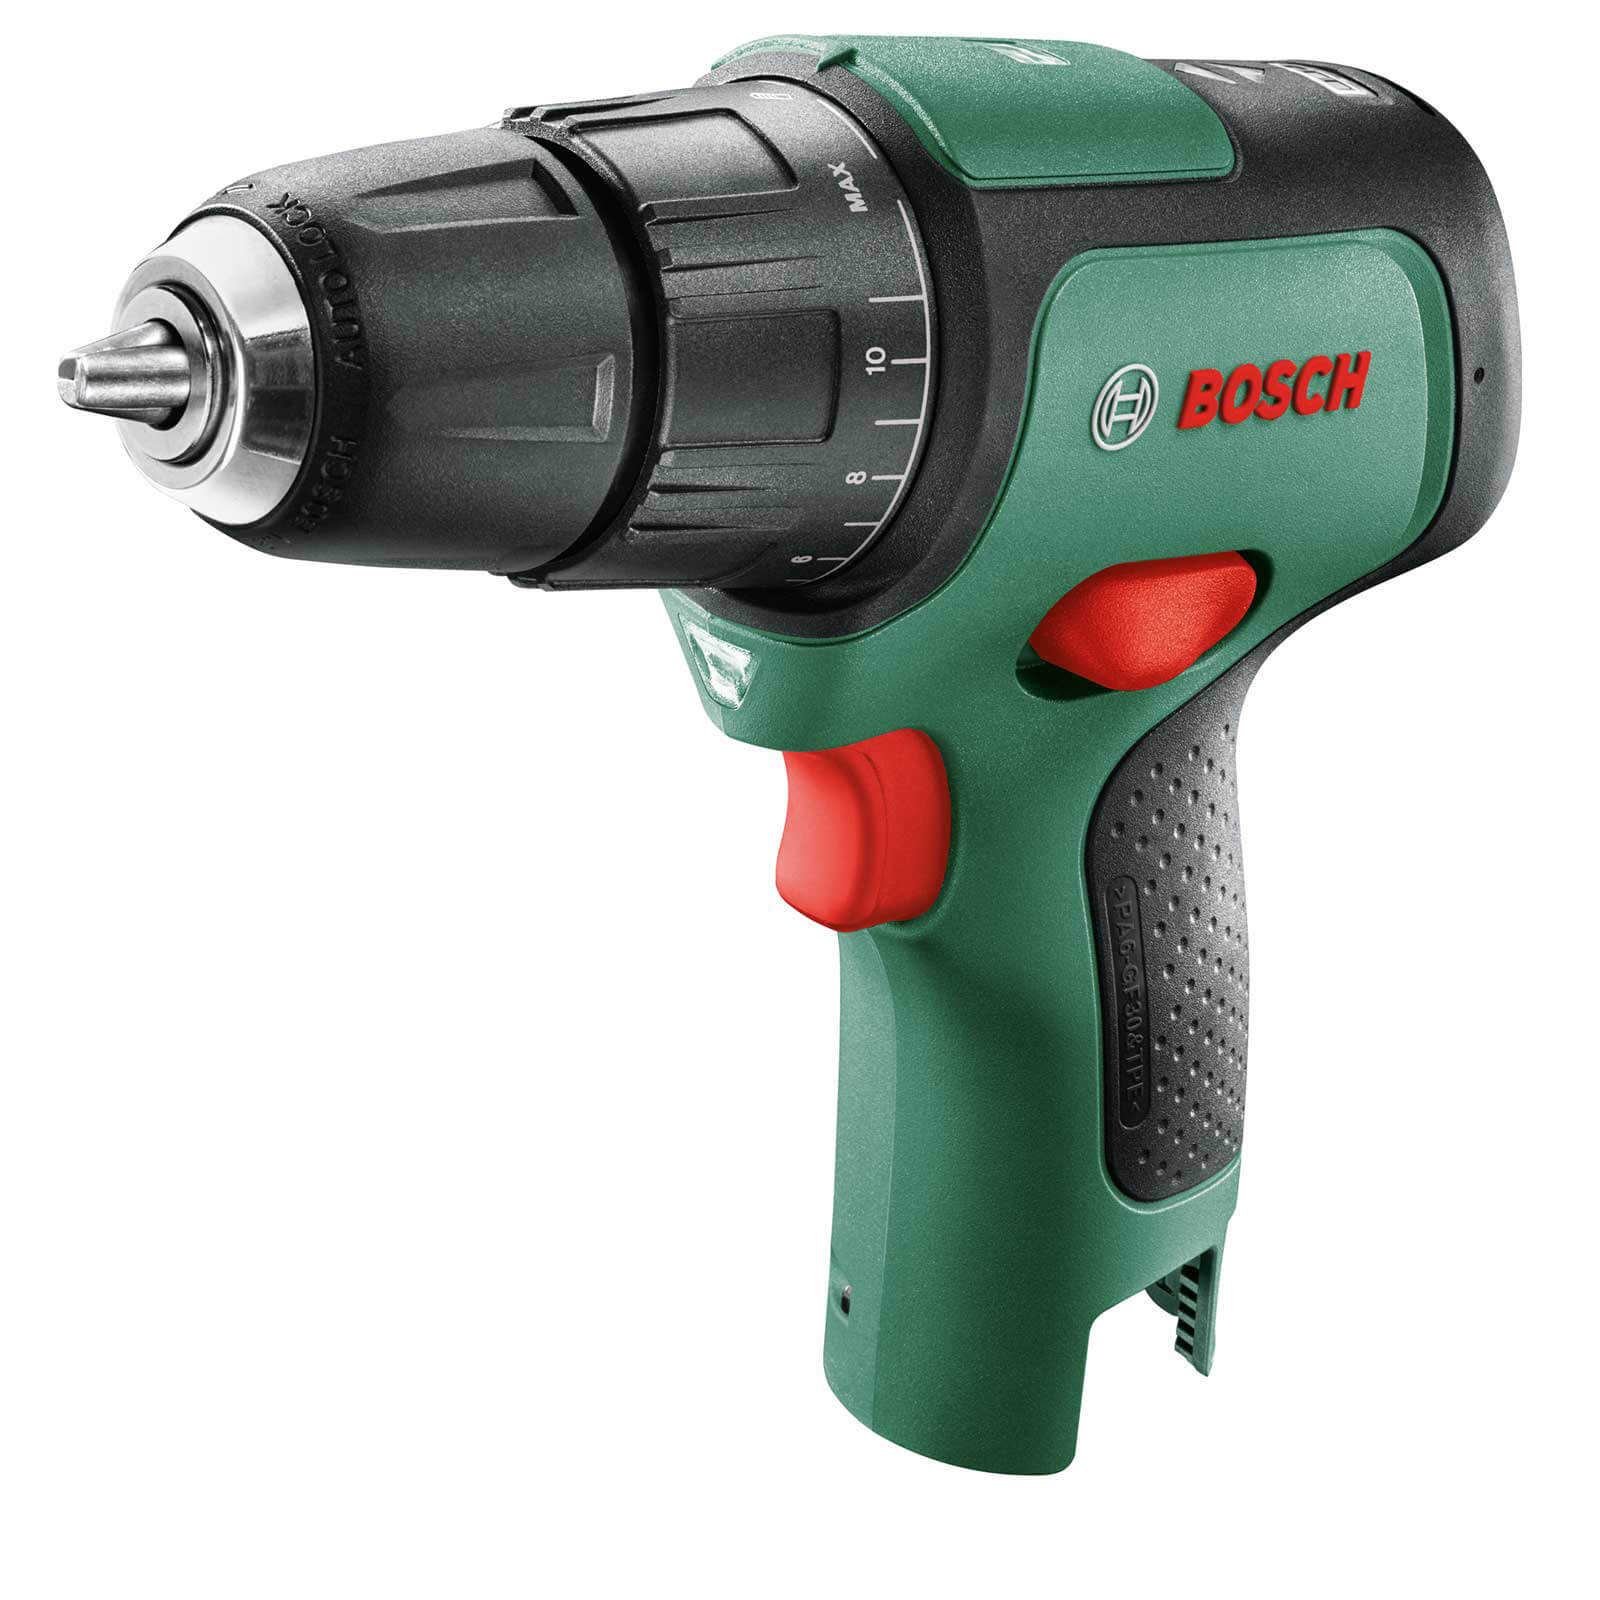 Image of Bosch EASYIMPACT 12v Cordless Brushless Combi Drill No Batteries Charger No Case